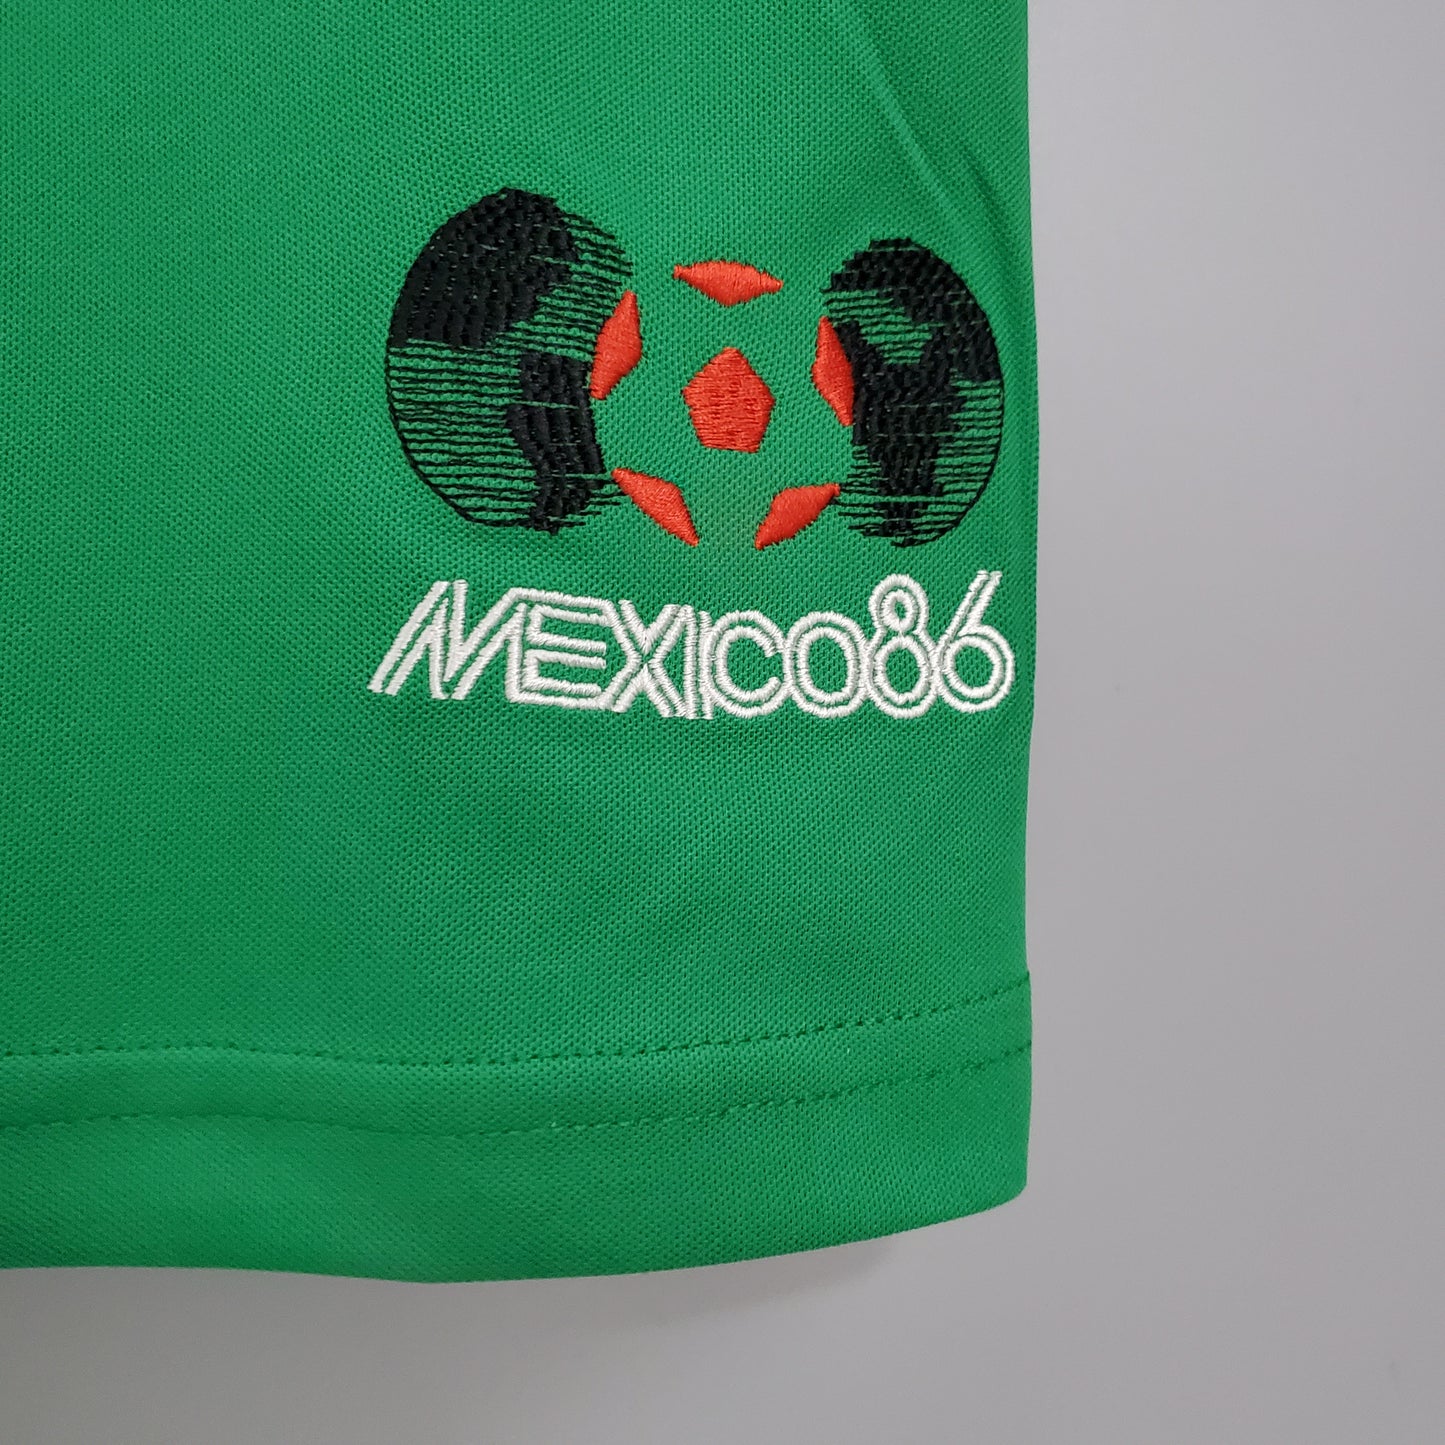 Mexico 1986 Home Jersey